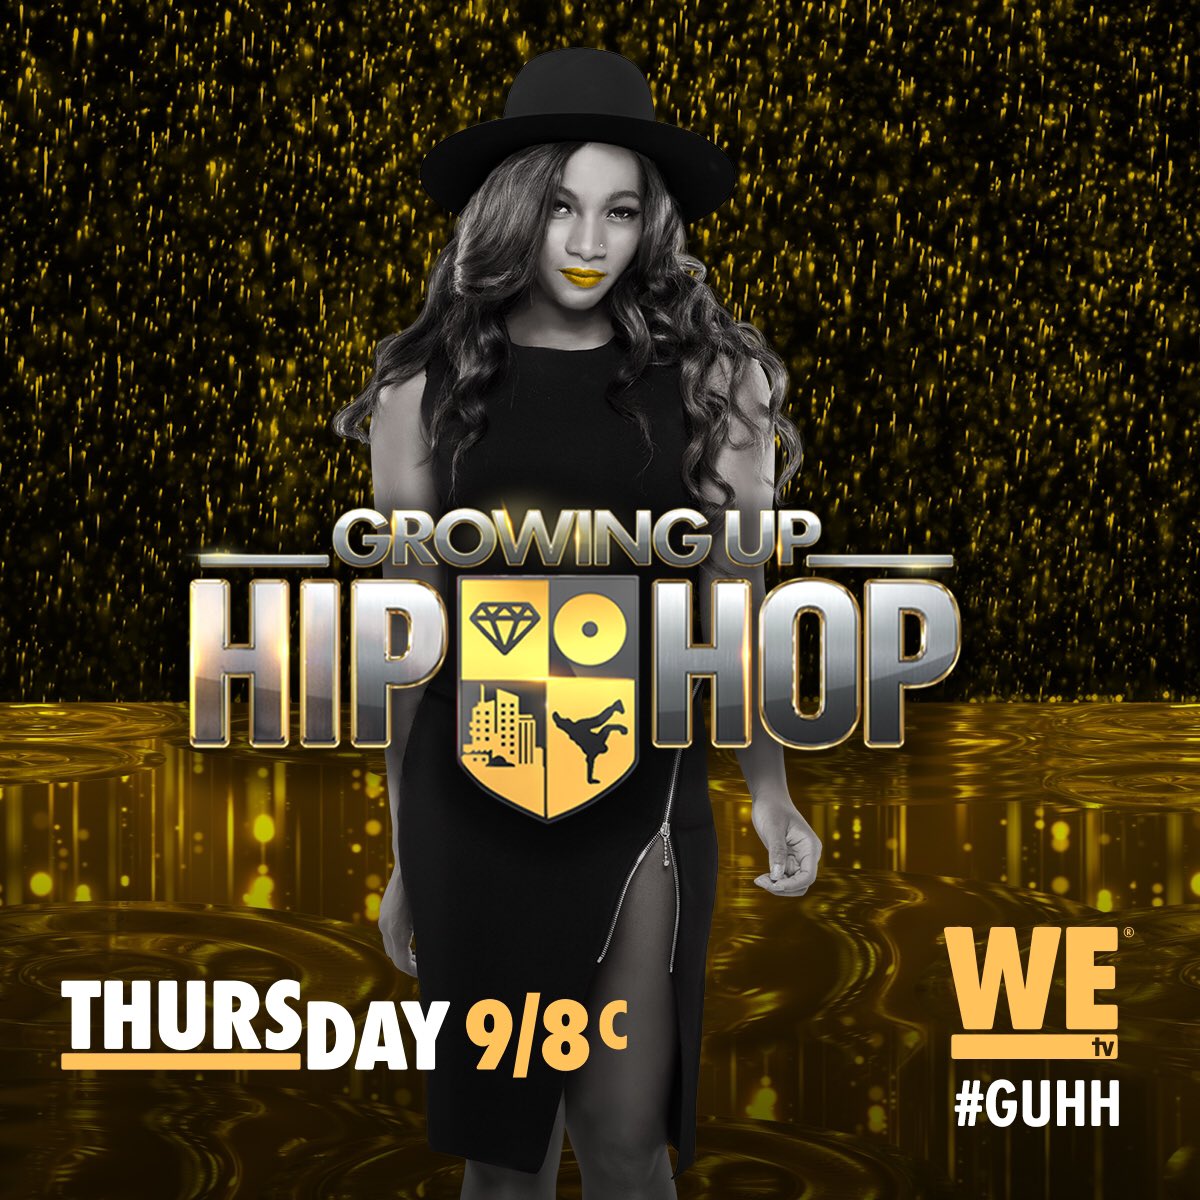 Yep it's our little lady @EgyptCriss tonight only on @WEtv at 9PM #GUHH watch and let us know what you think. ???????????? https://t.co/slGtYzcRPm